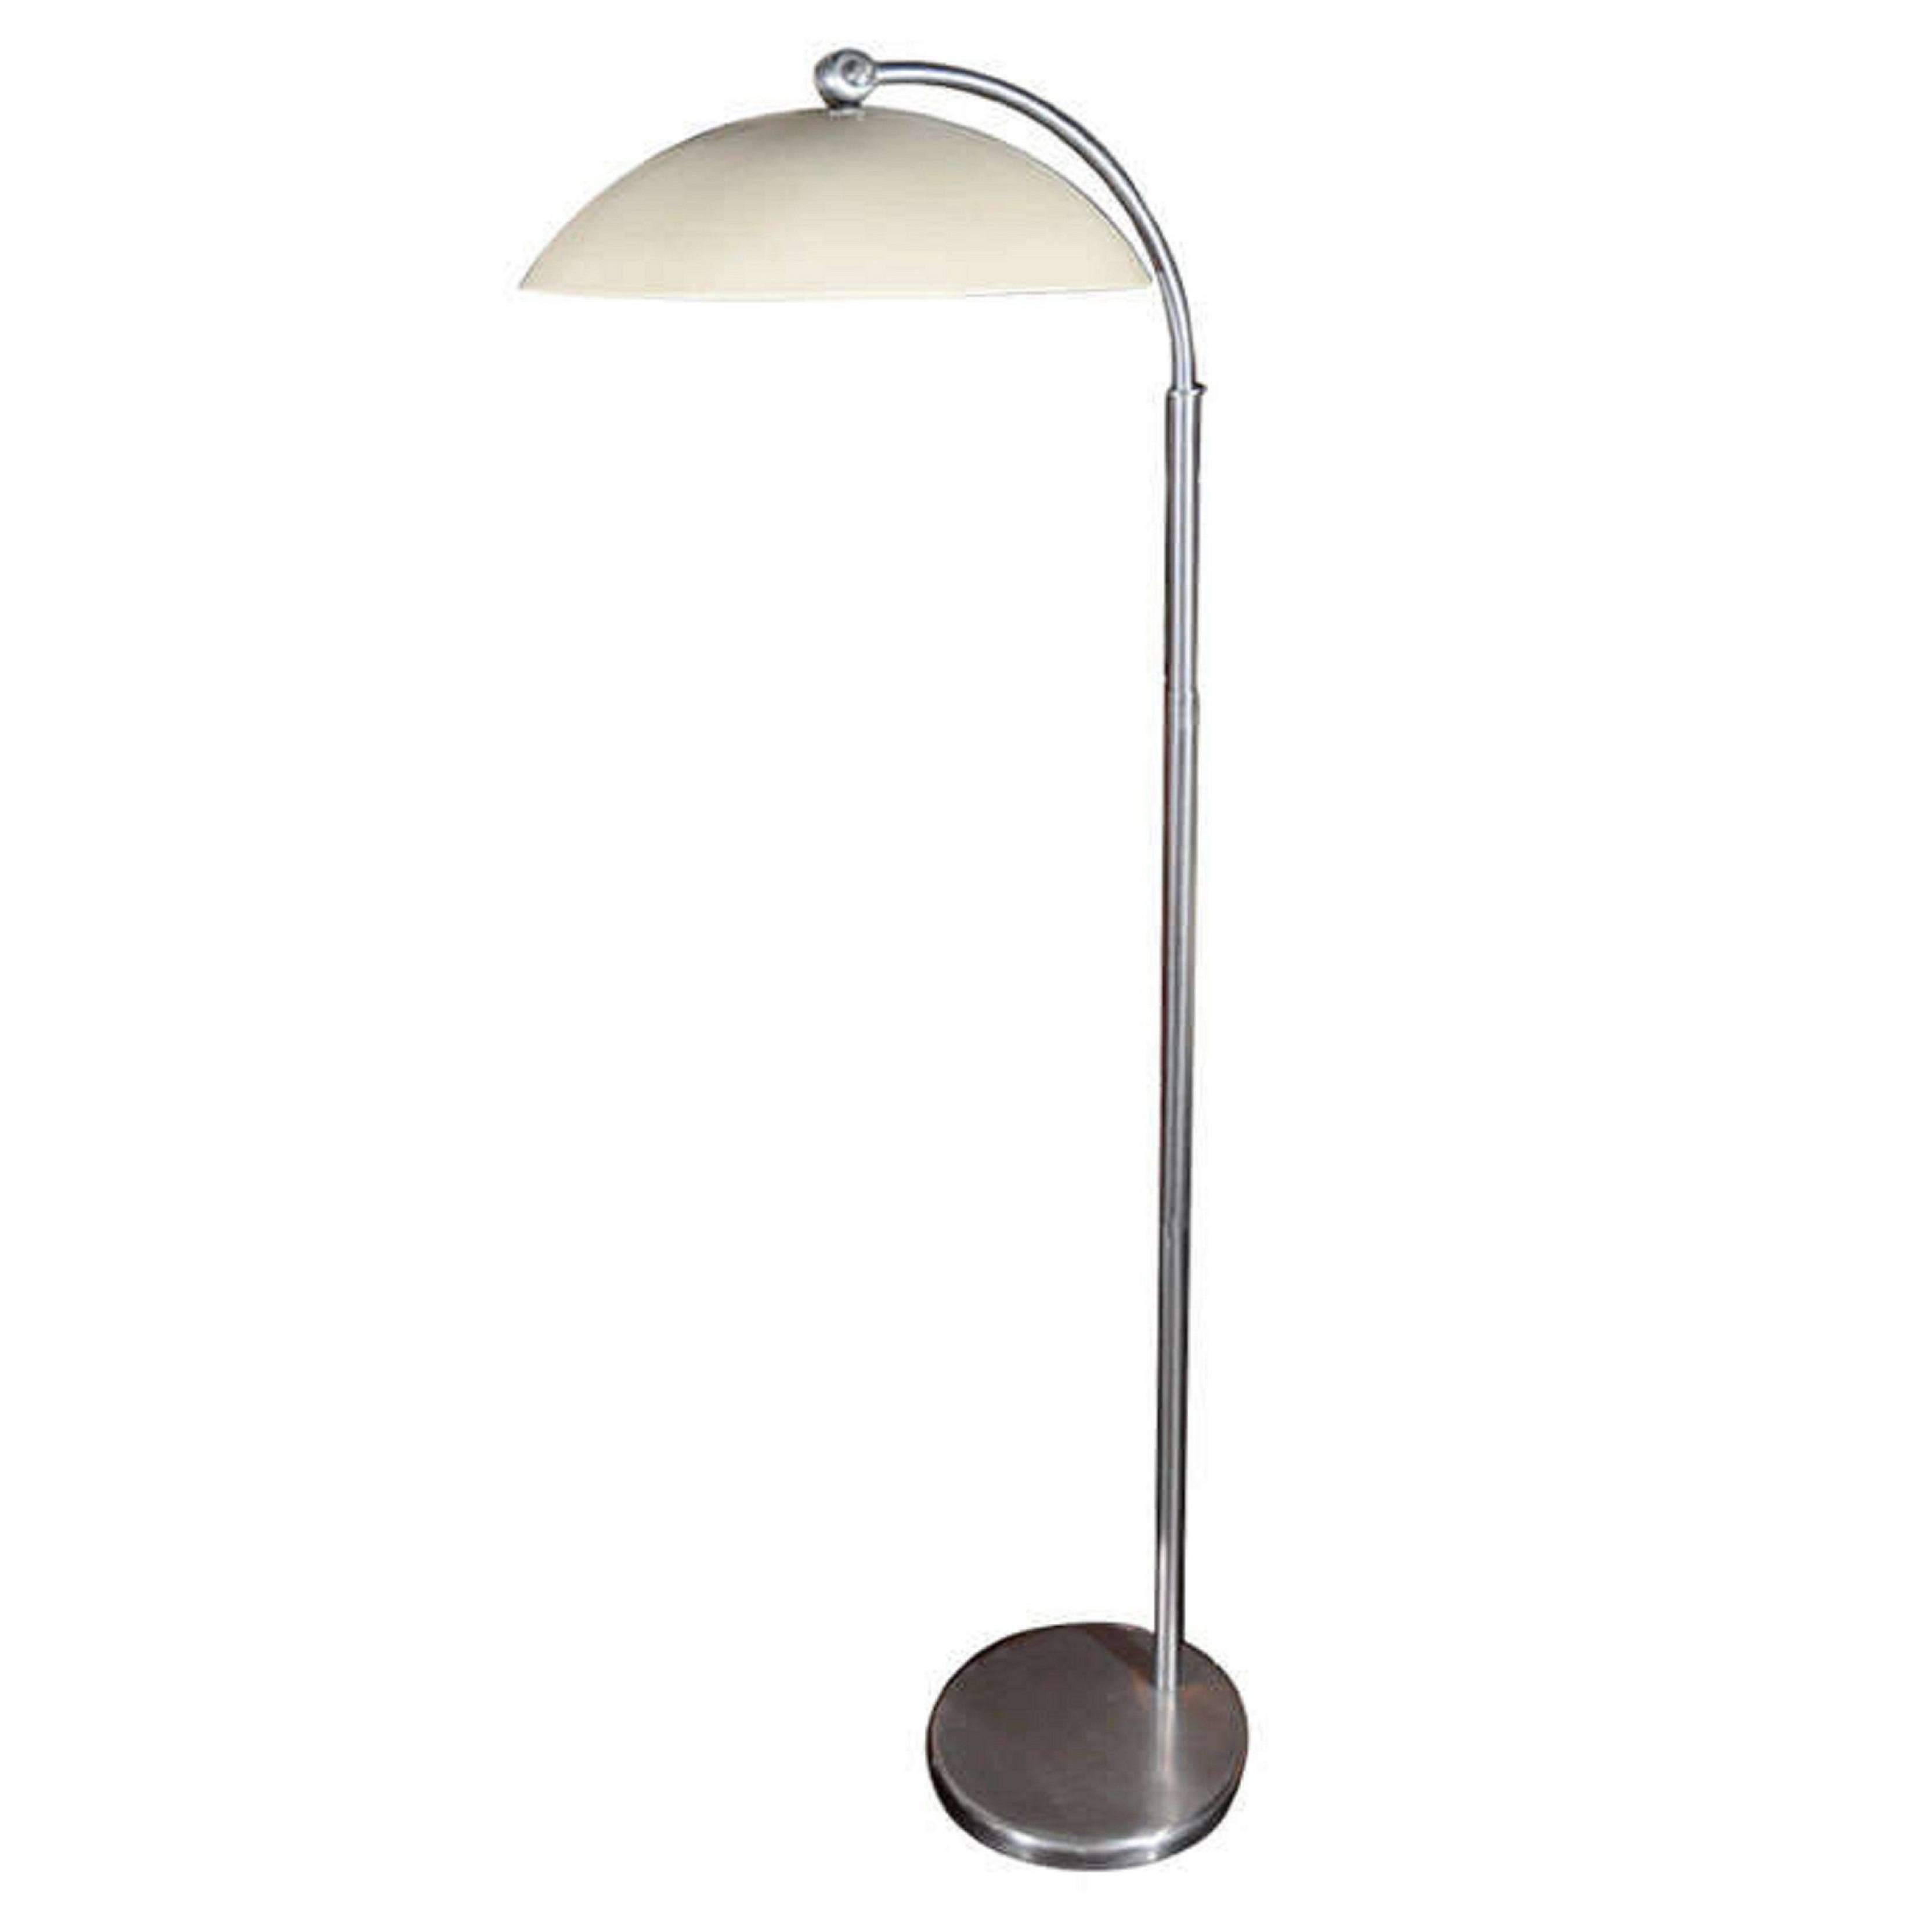 Standing lamp in stained chrome with painted aluminum dome shade, with circular base, by Walter Von Nessen, American, 1940s. Rare. Measures: Height 59 1/2 in., diameter of shade 15 1/2 in. 